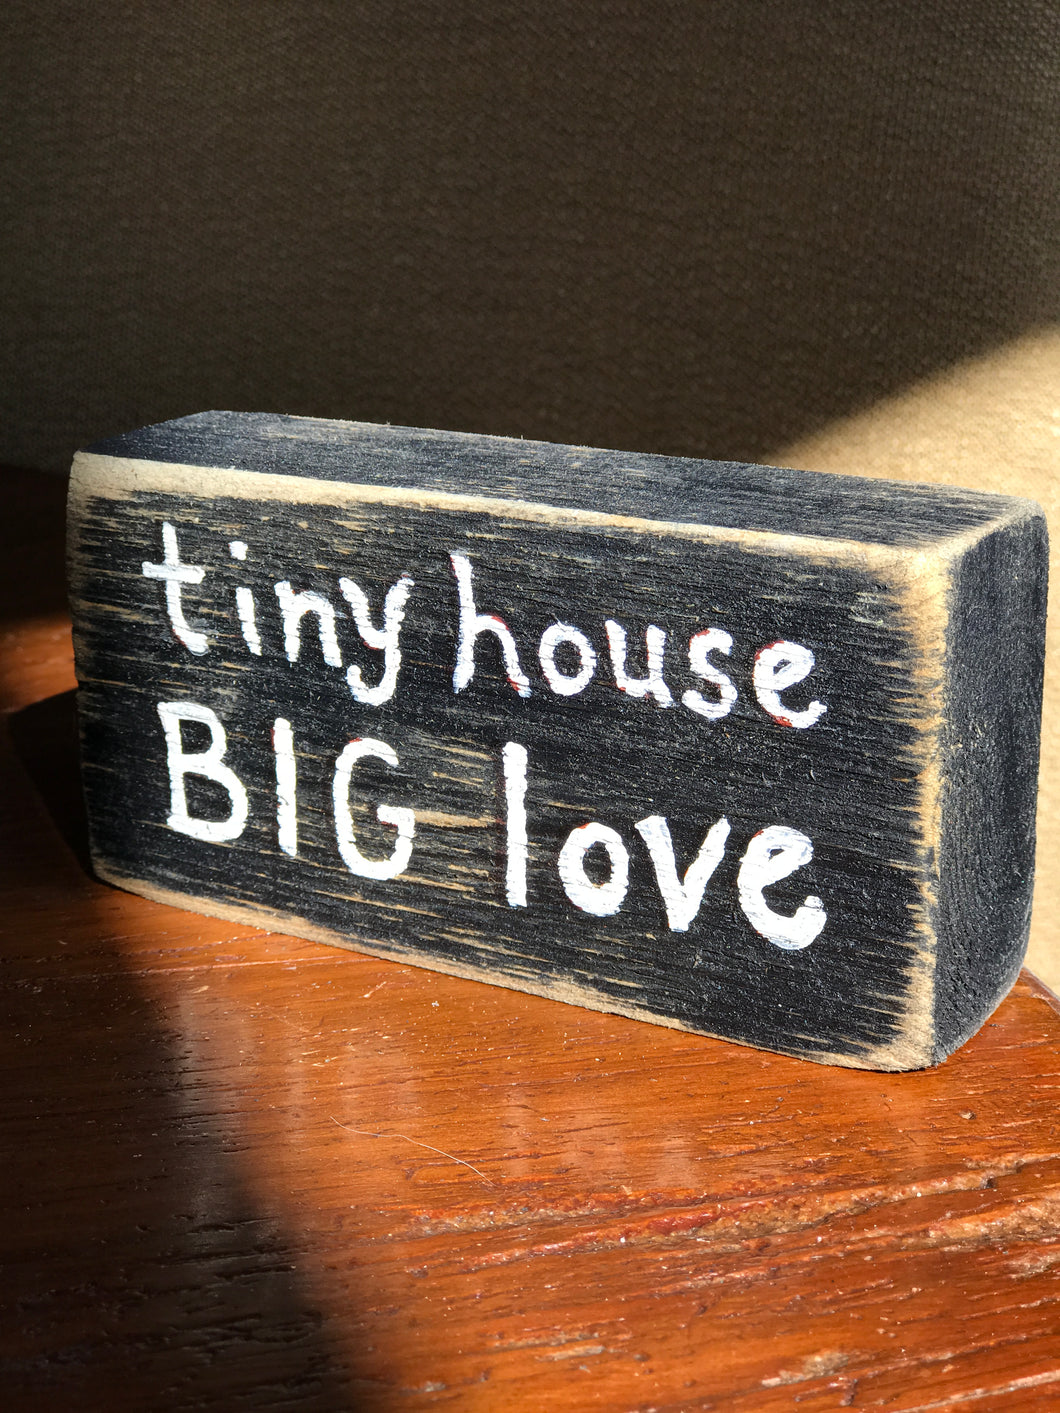 Tiny House Big Love - Upcycled Hand-painted Wood Block